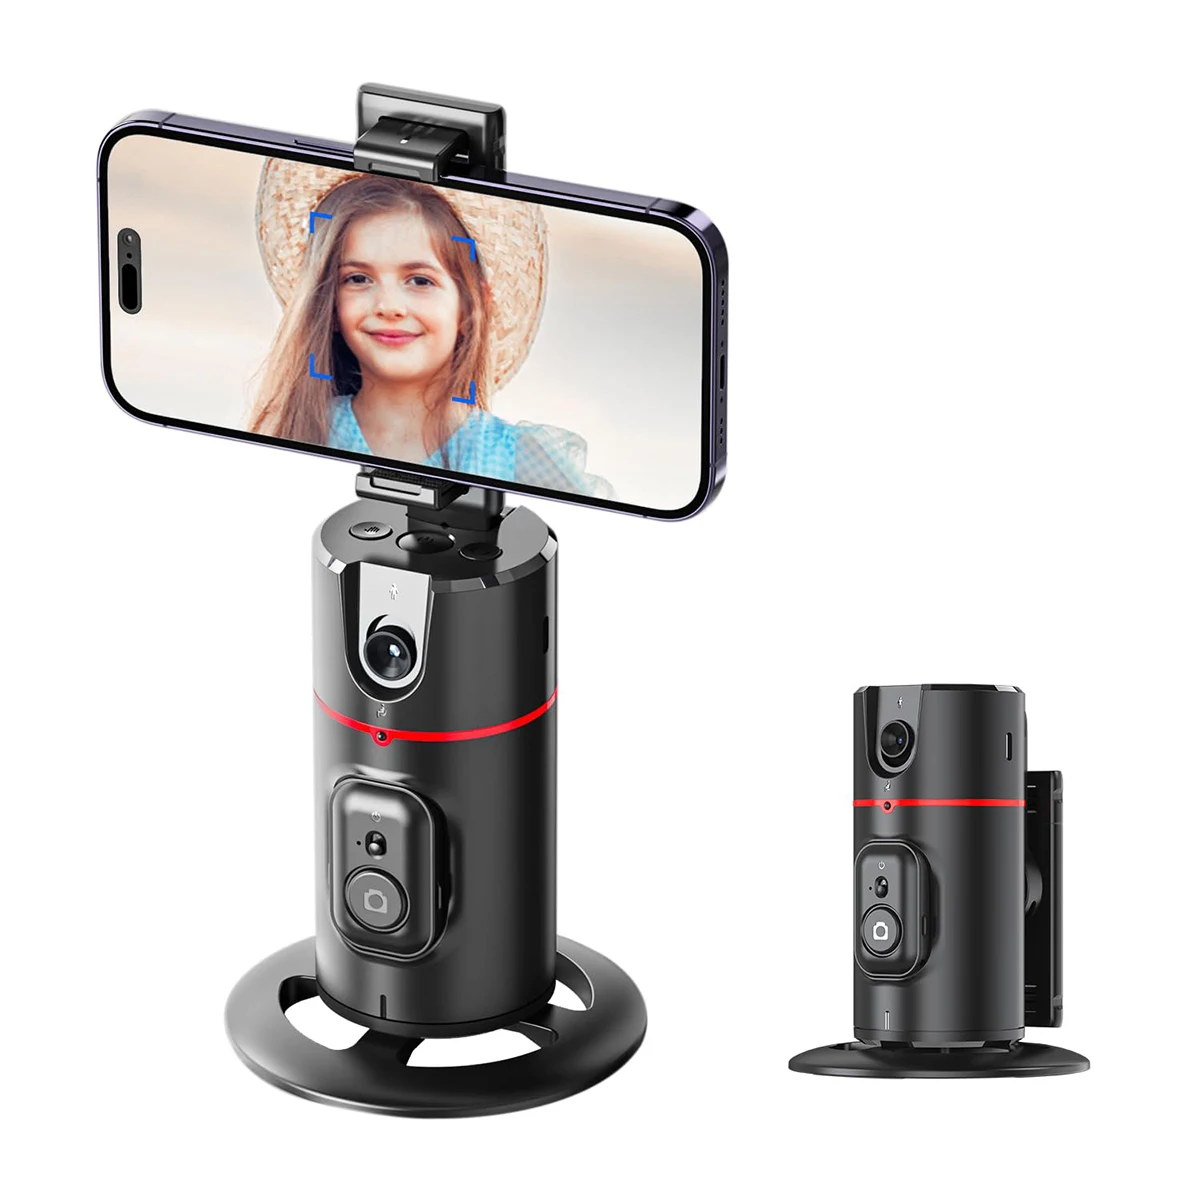 

360 Degree Rotation Auto Face Tracking Phone Holder Stand Foldable Gesture Operation for Mobile Smartphone Vlog Live Streaming